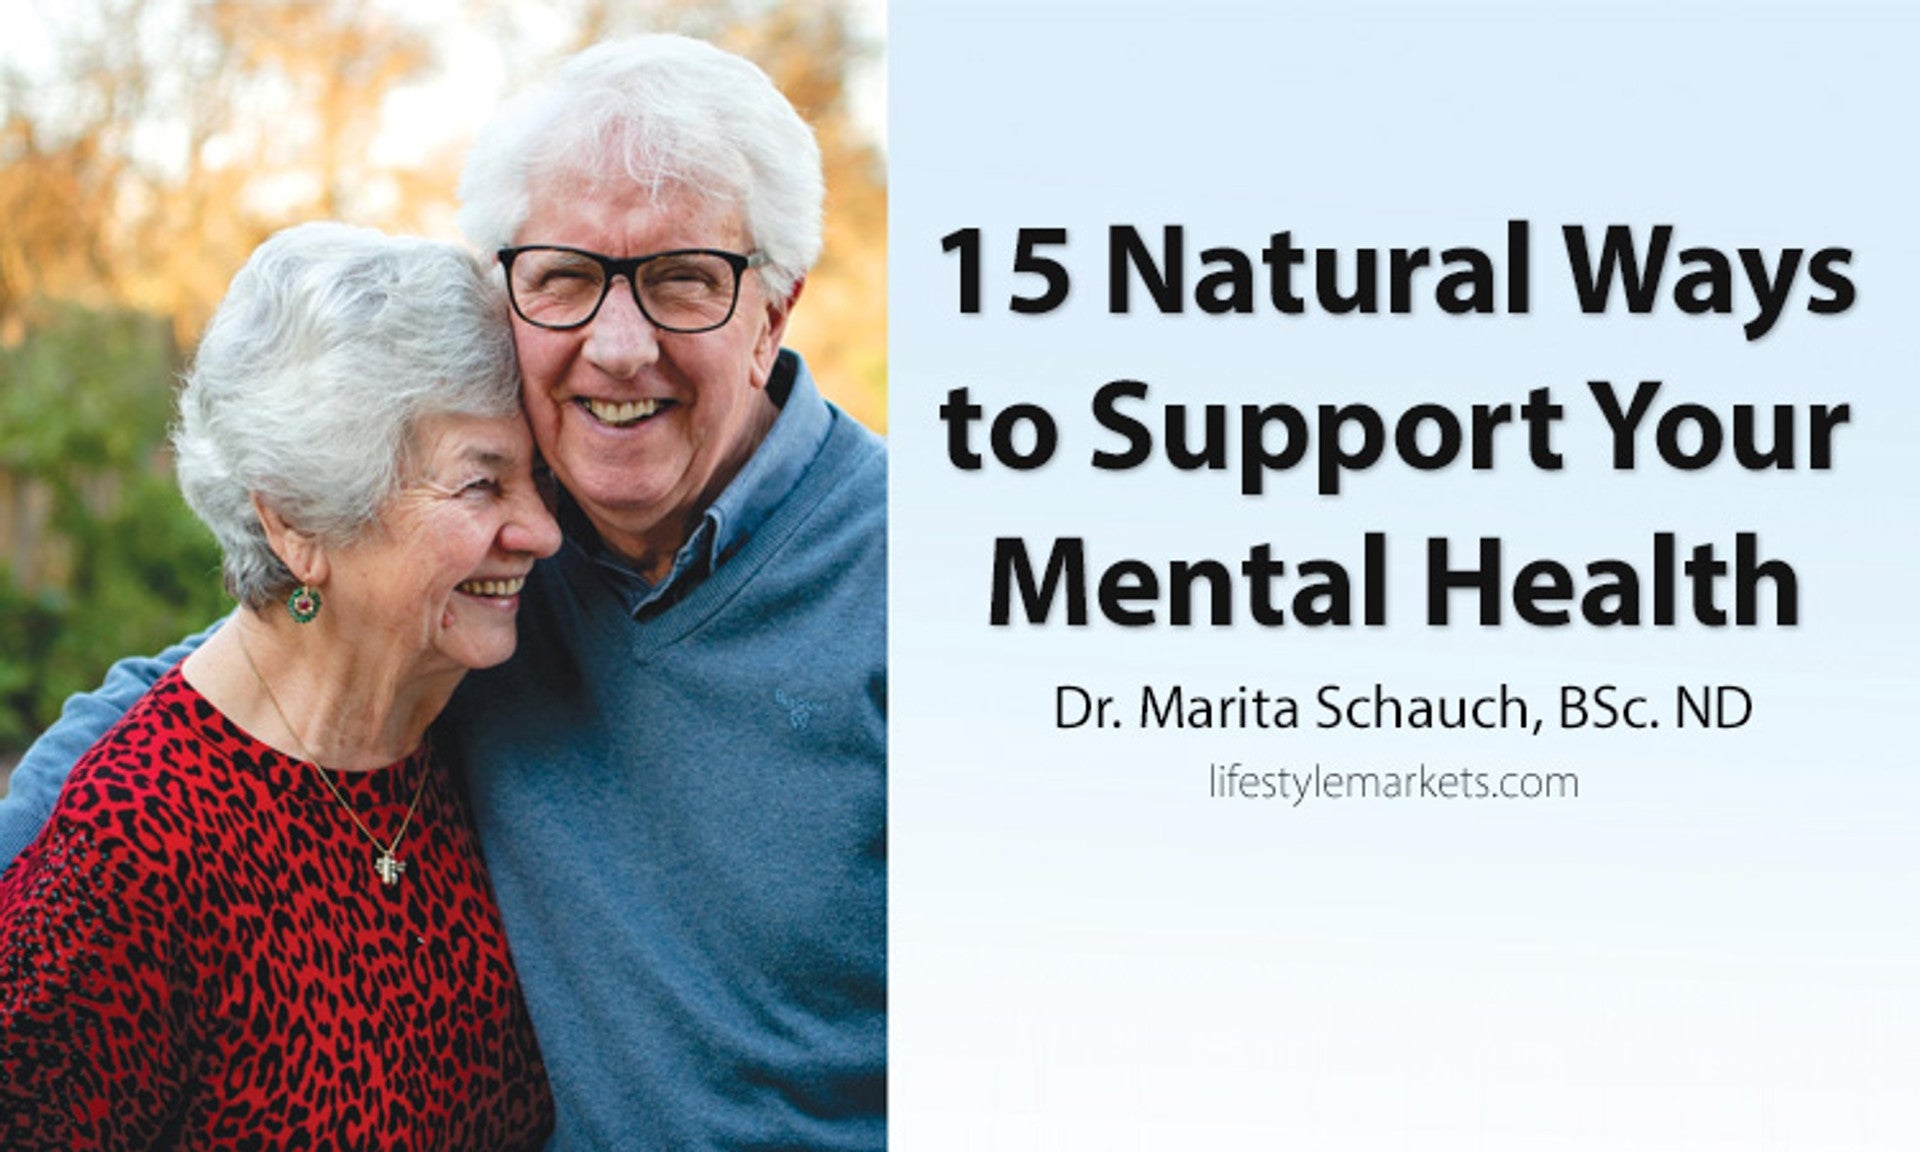 15 Natural Ways to Support Your Mental Health